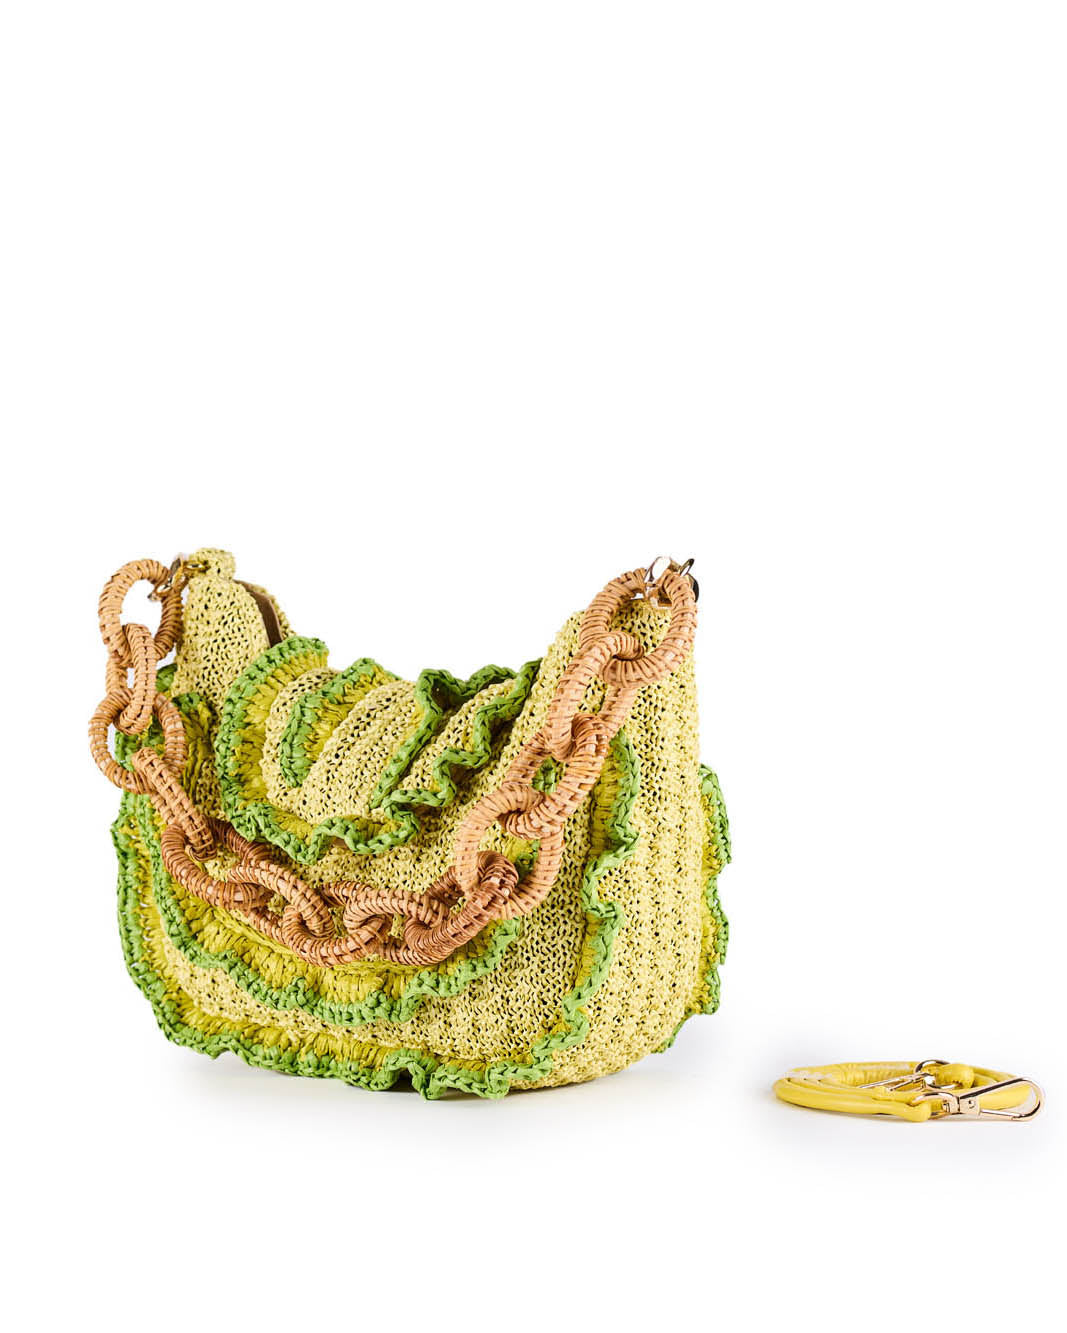 Hand-crocheted lime green and yellow ruffled bag with a thick braided handle